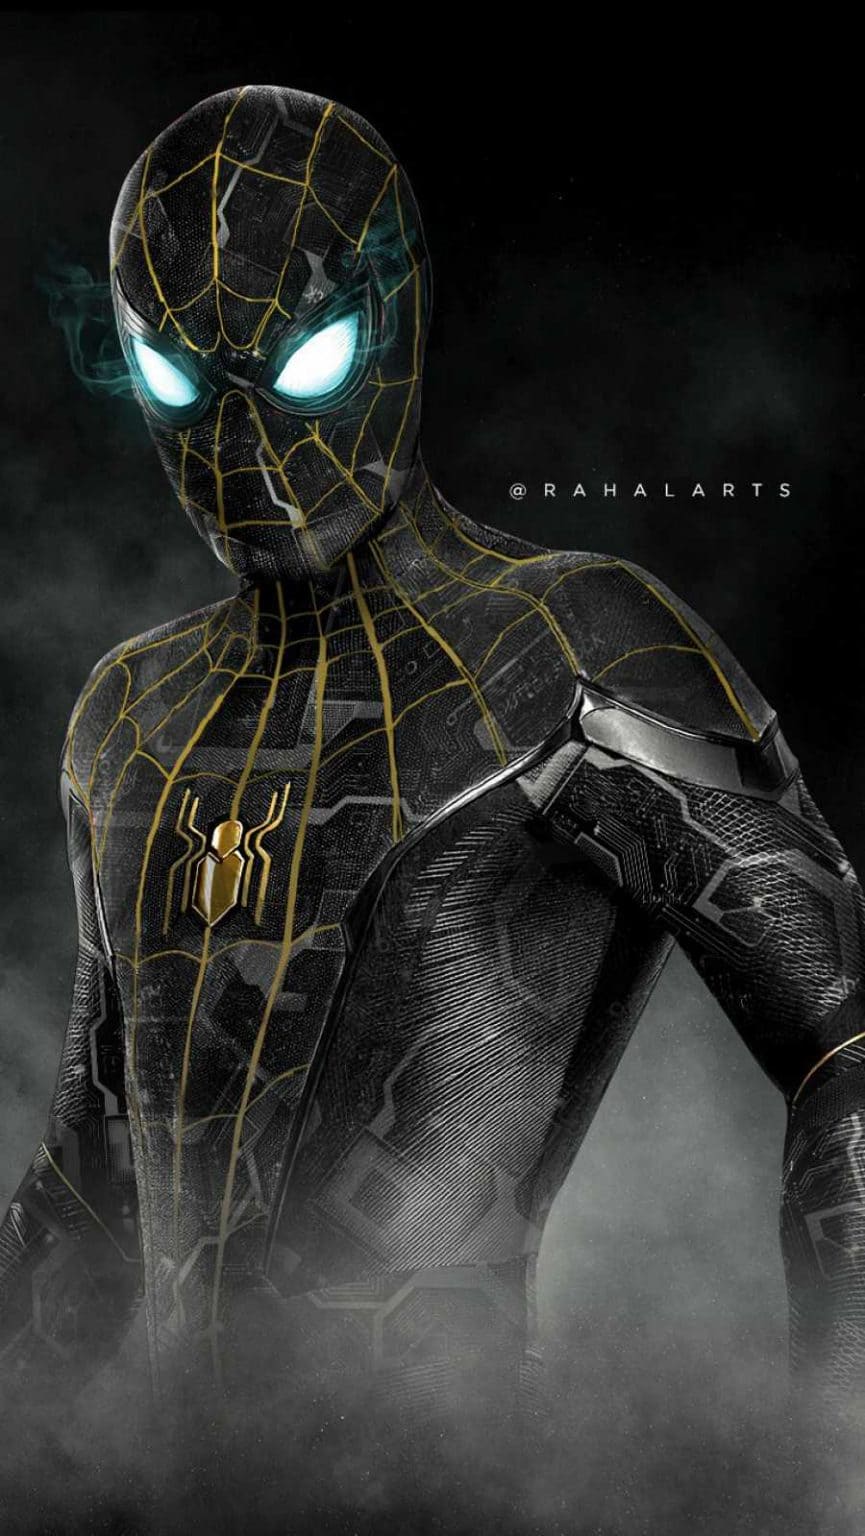 Spiderman Black and Gold Suit iphone 13 pro max wallpaper 13 pro max Wallpaper, iPhone 12 Background, iPhone Wallpaper, iPhone background., WallpaperUpdate, Best iPhone Wallpaper and iPhone background